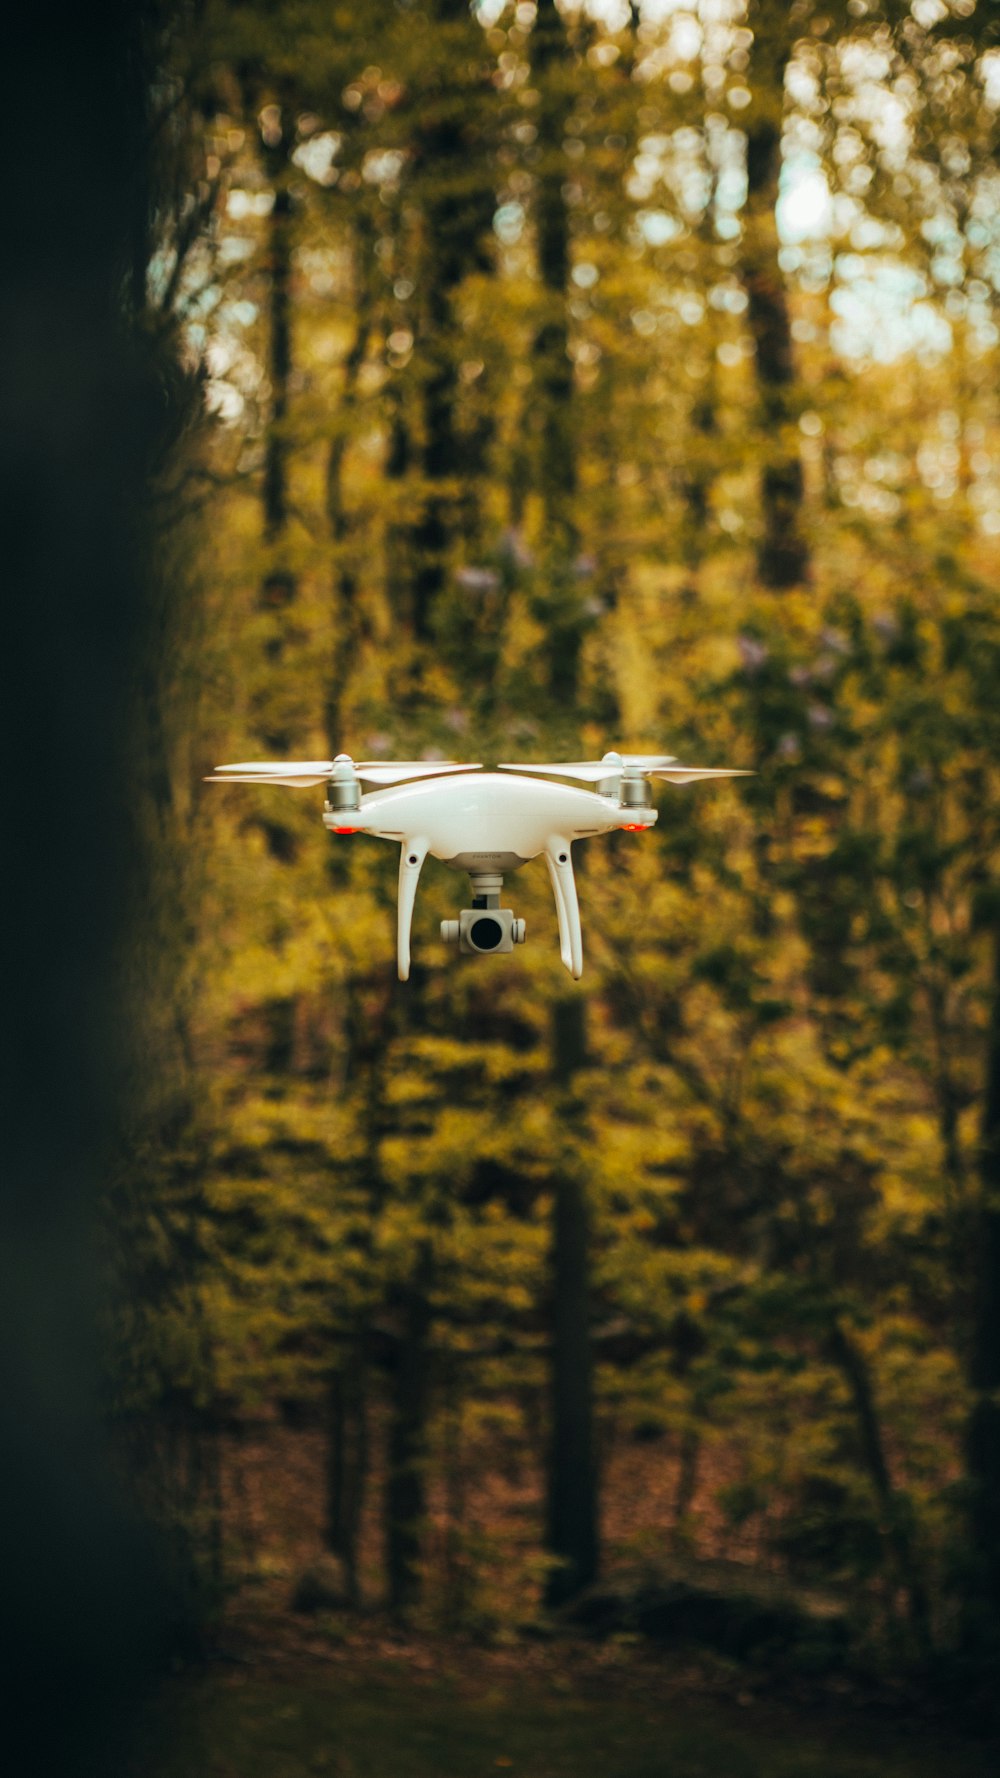 white drone flying over green trees during daytime